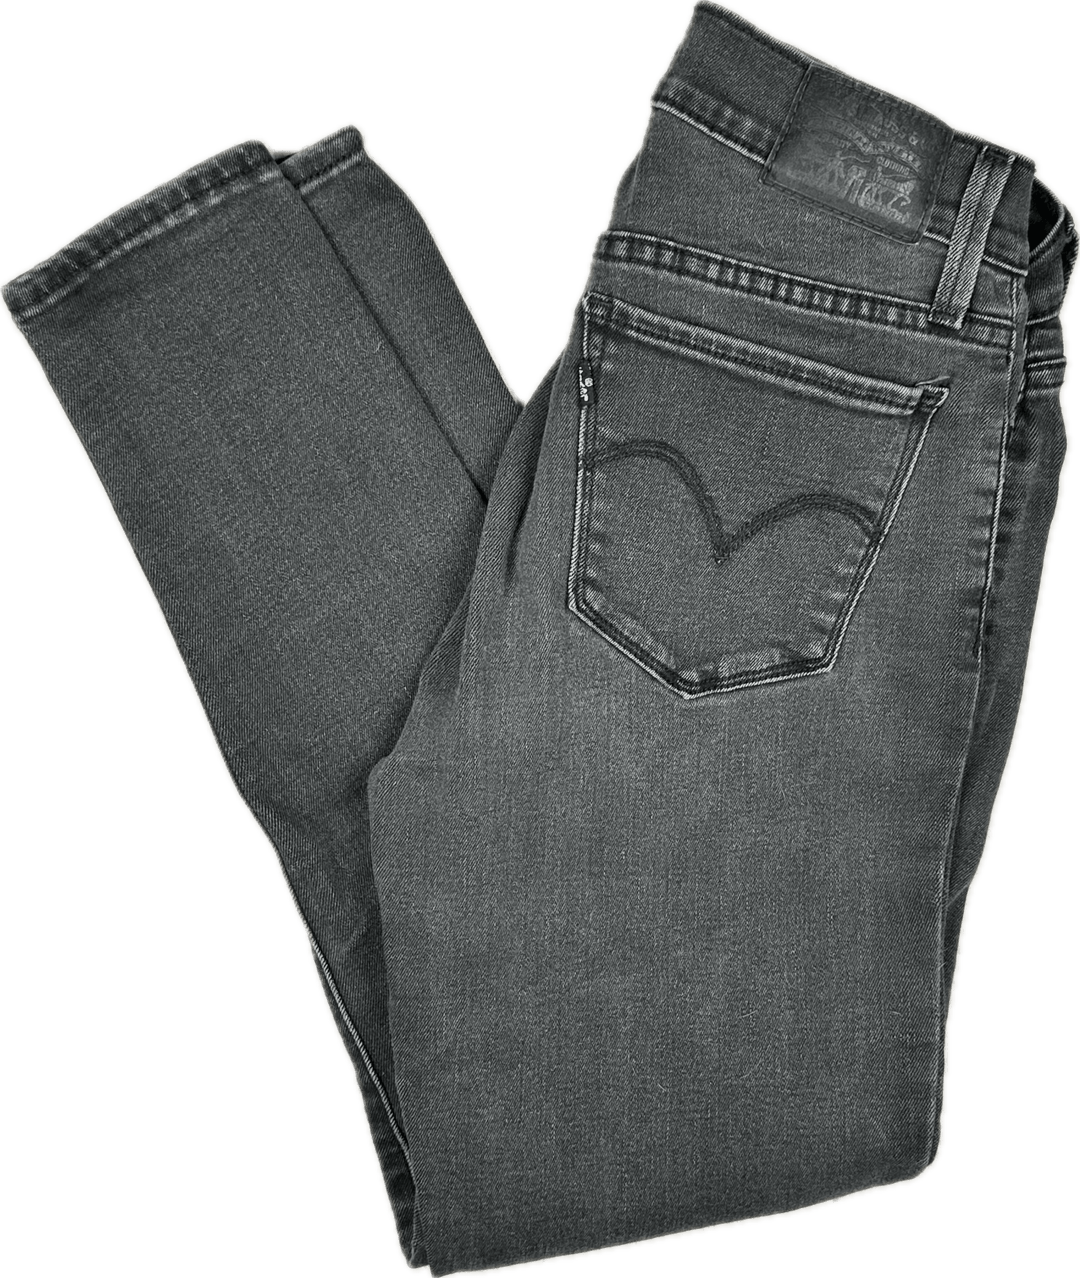 Levis 710 Super Skinny Mid Rise Faded Black Jeans - Size 28 - Jean Pool